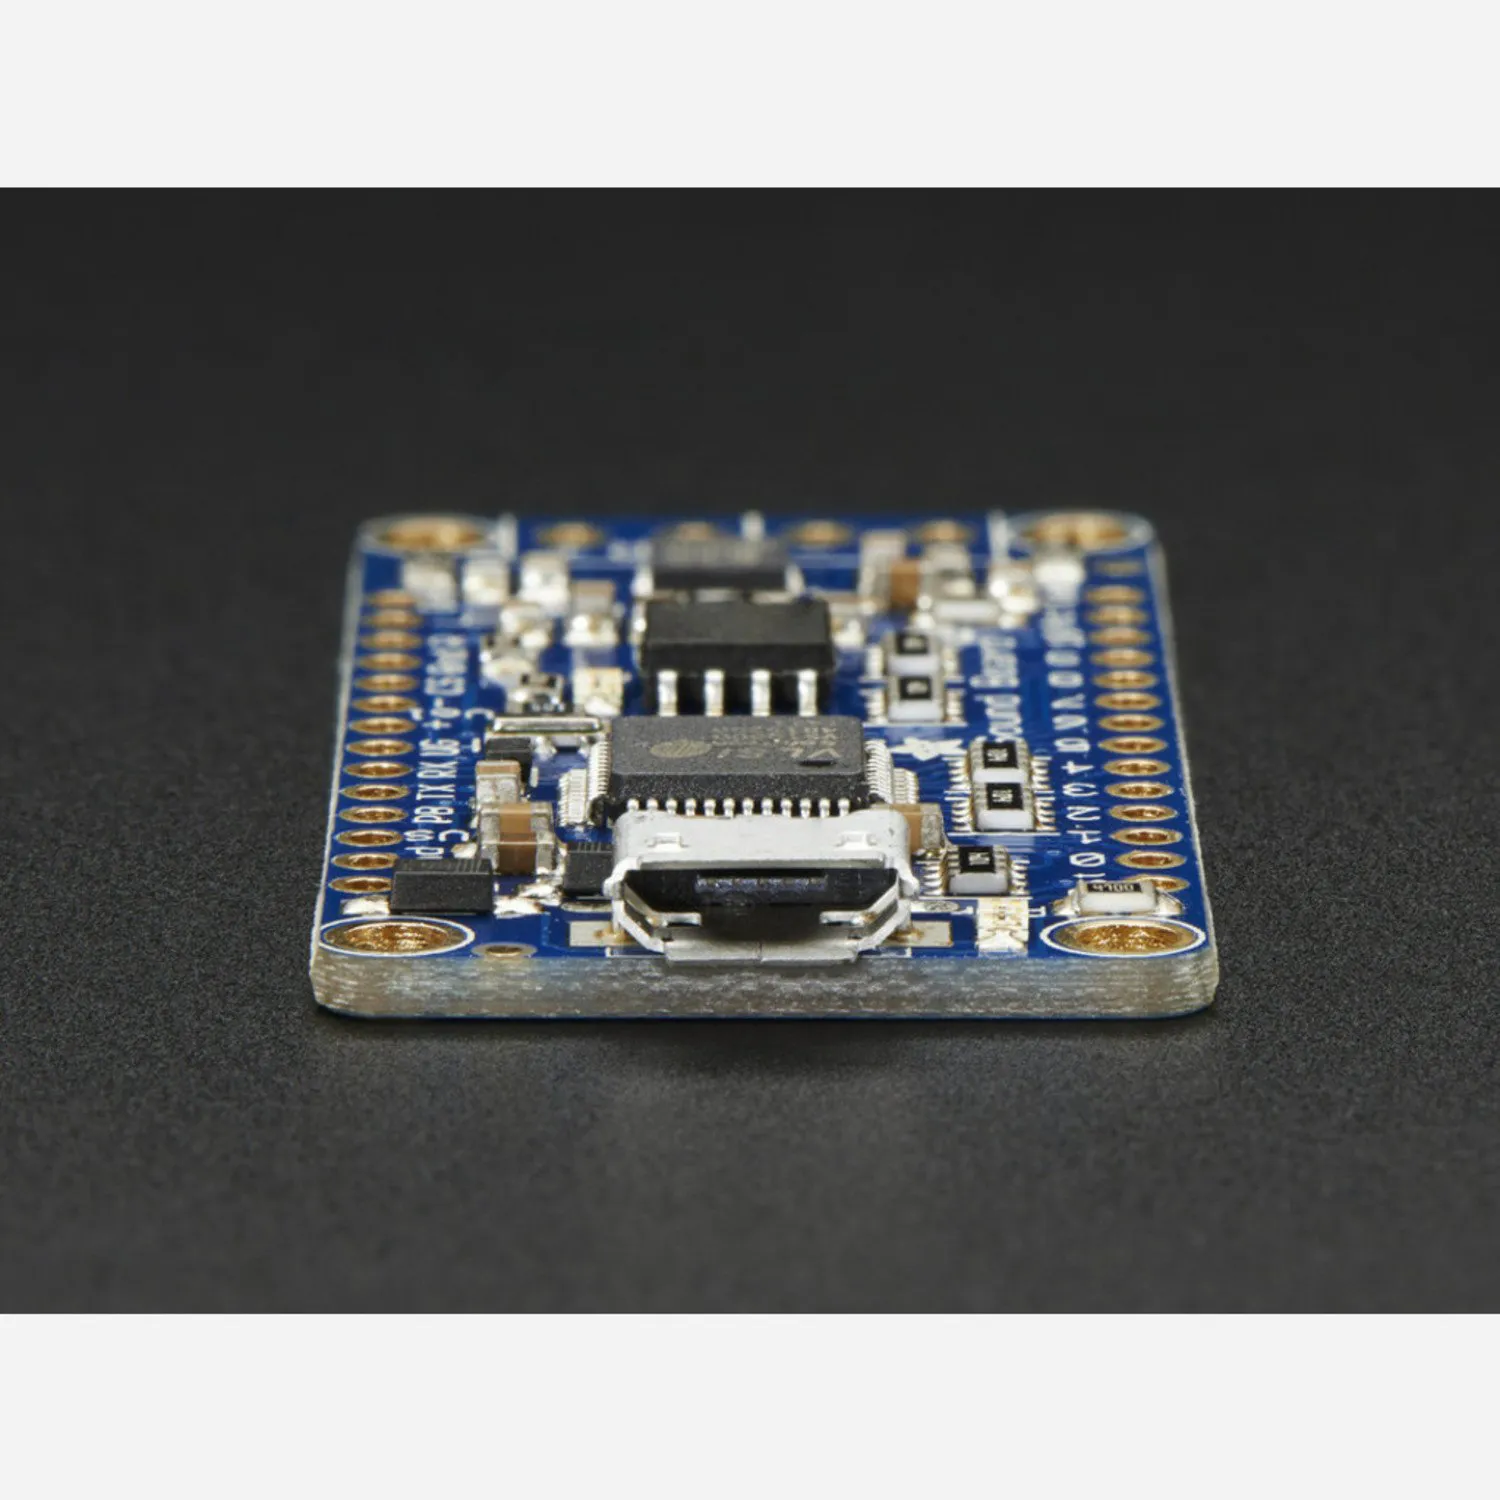 Photo of Adafruit Audio FX Sound Board - WAV/OGG Trigger - 2MB storage with 2.2W Stereo Amp